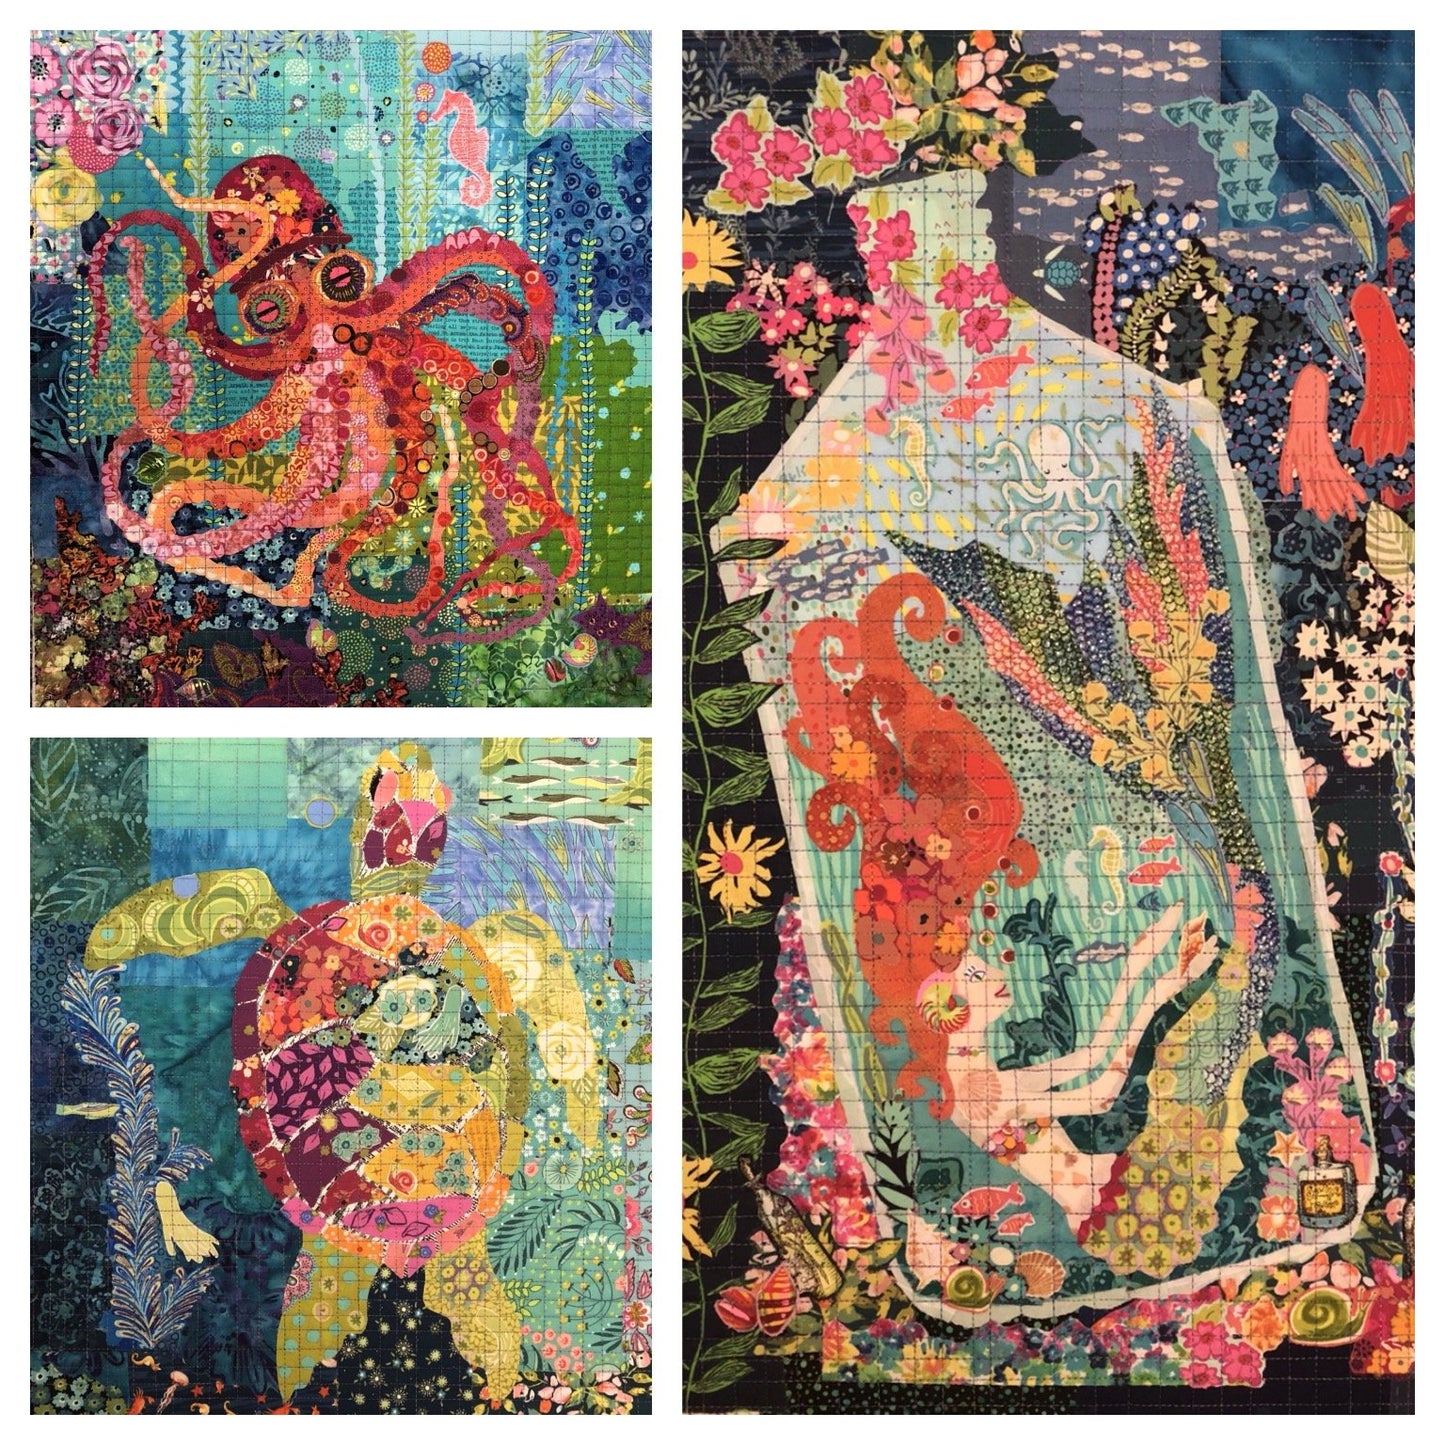 Octopus, Turtle and Mermaid Collage Patterns